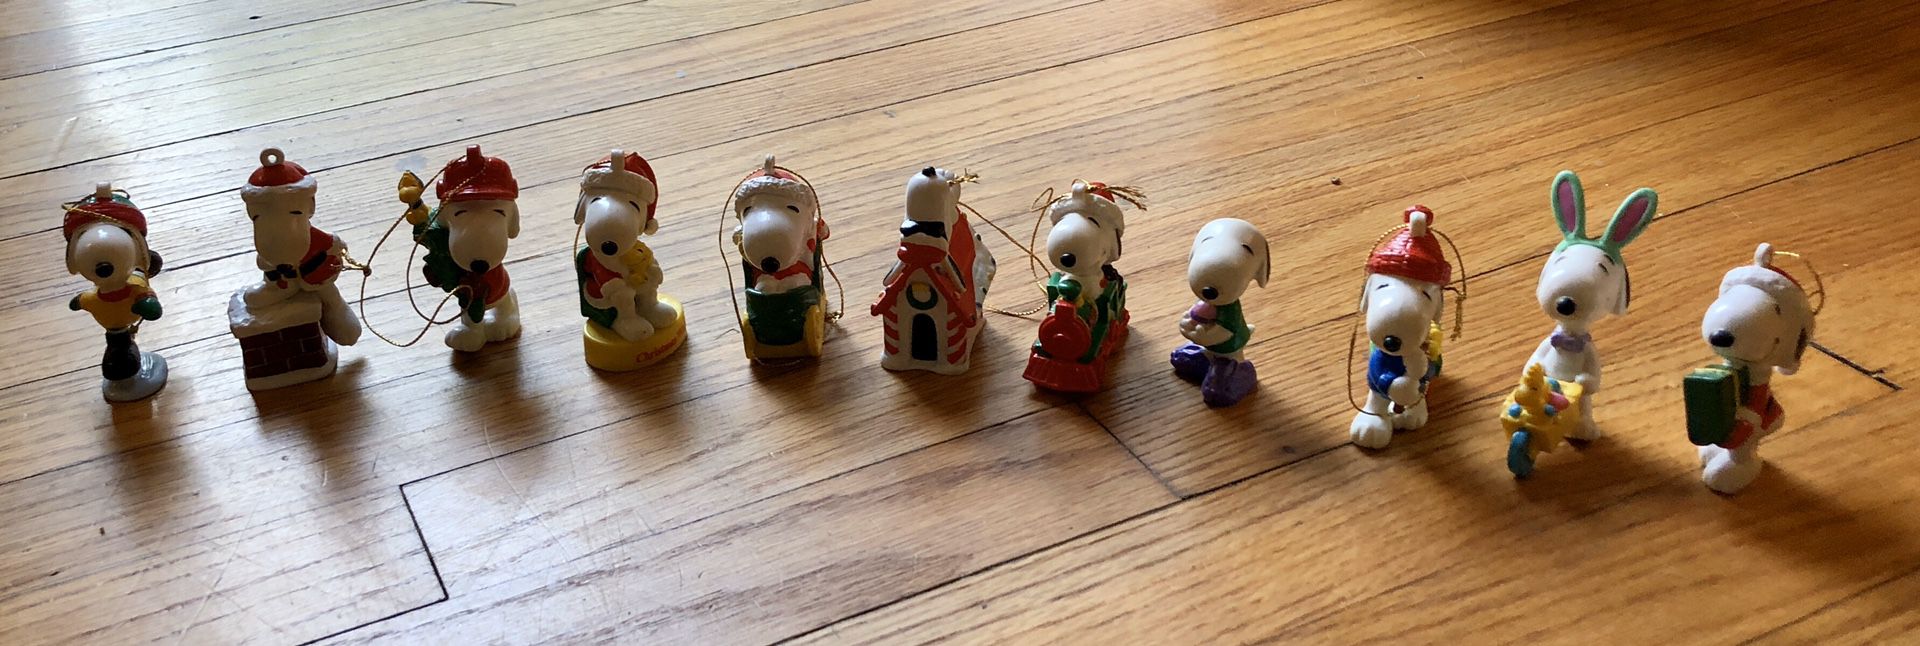 Snoopy set of 11 Christmas ornaments